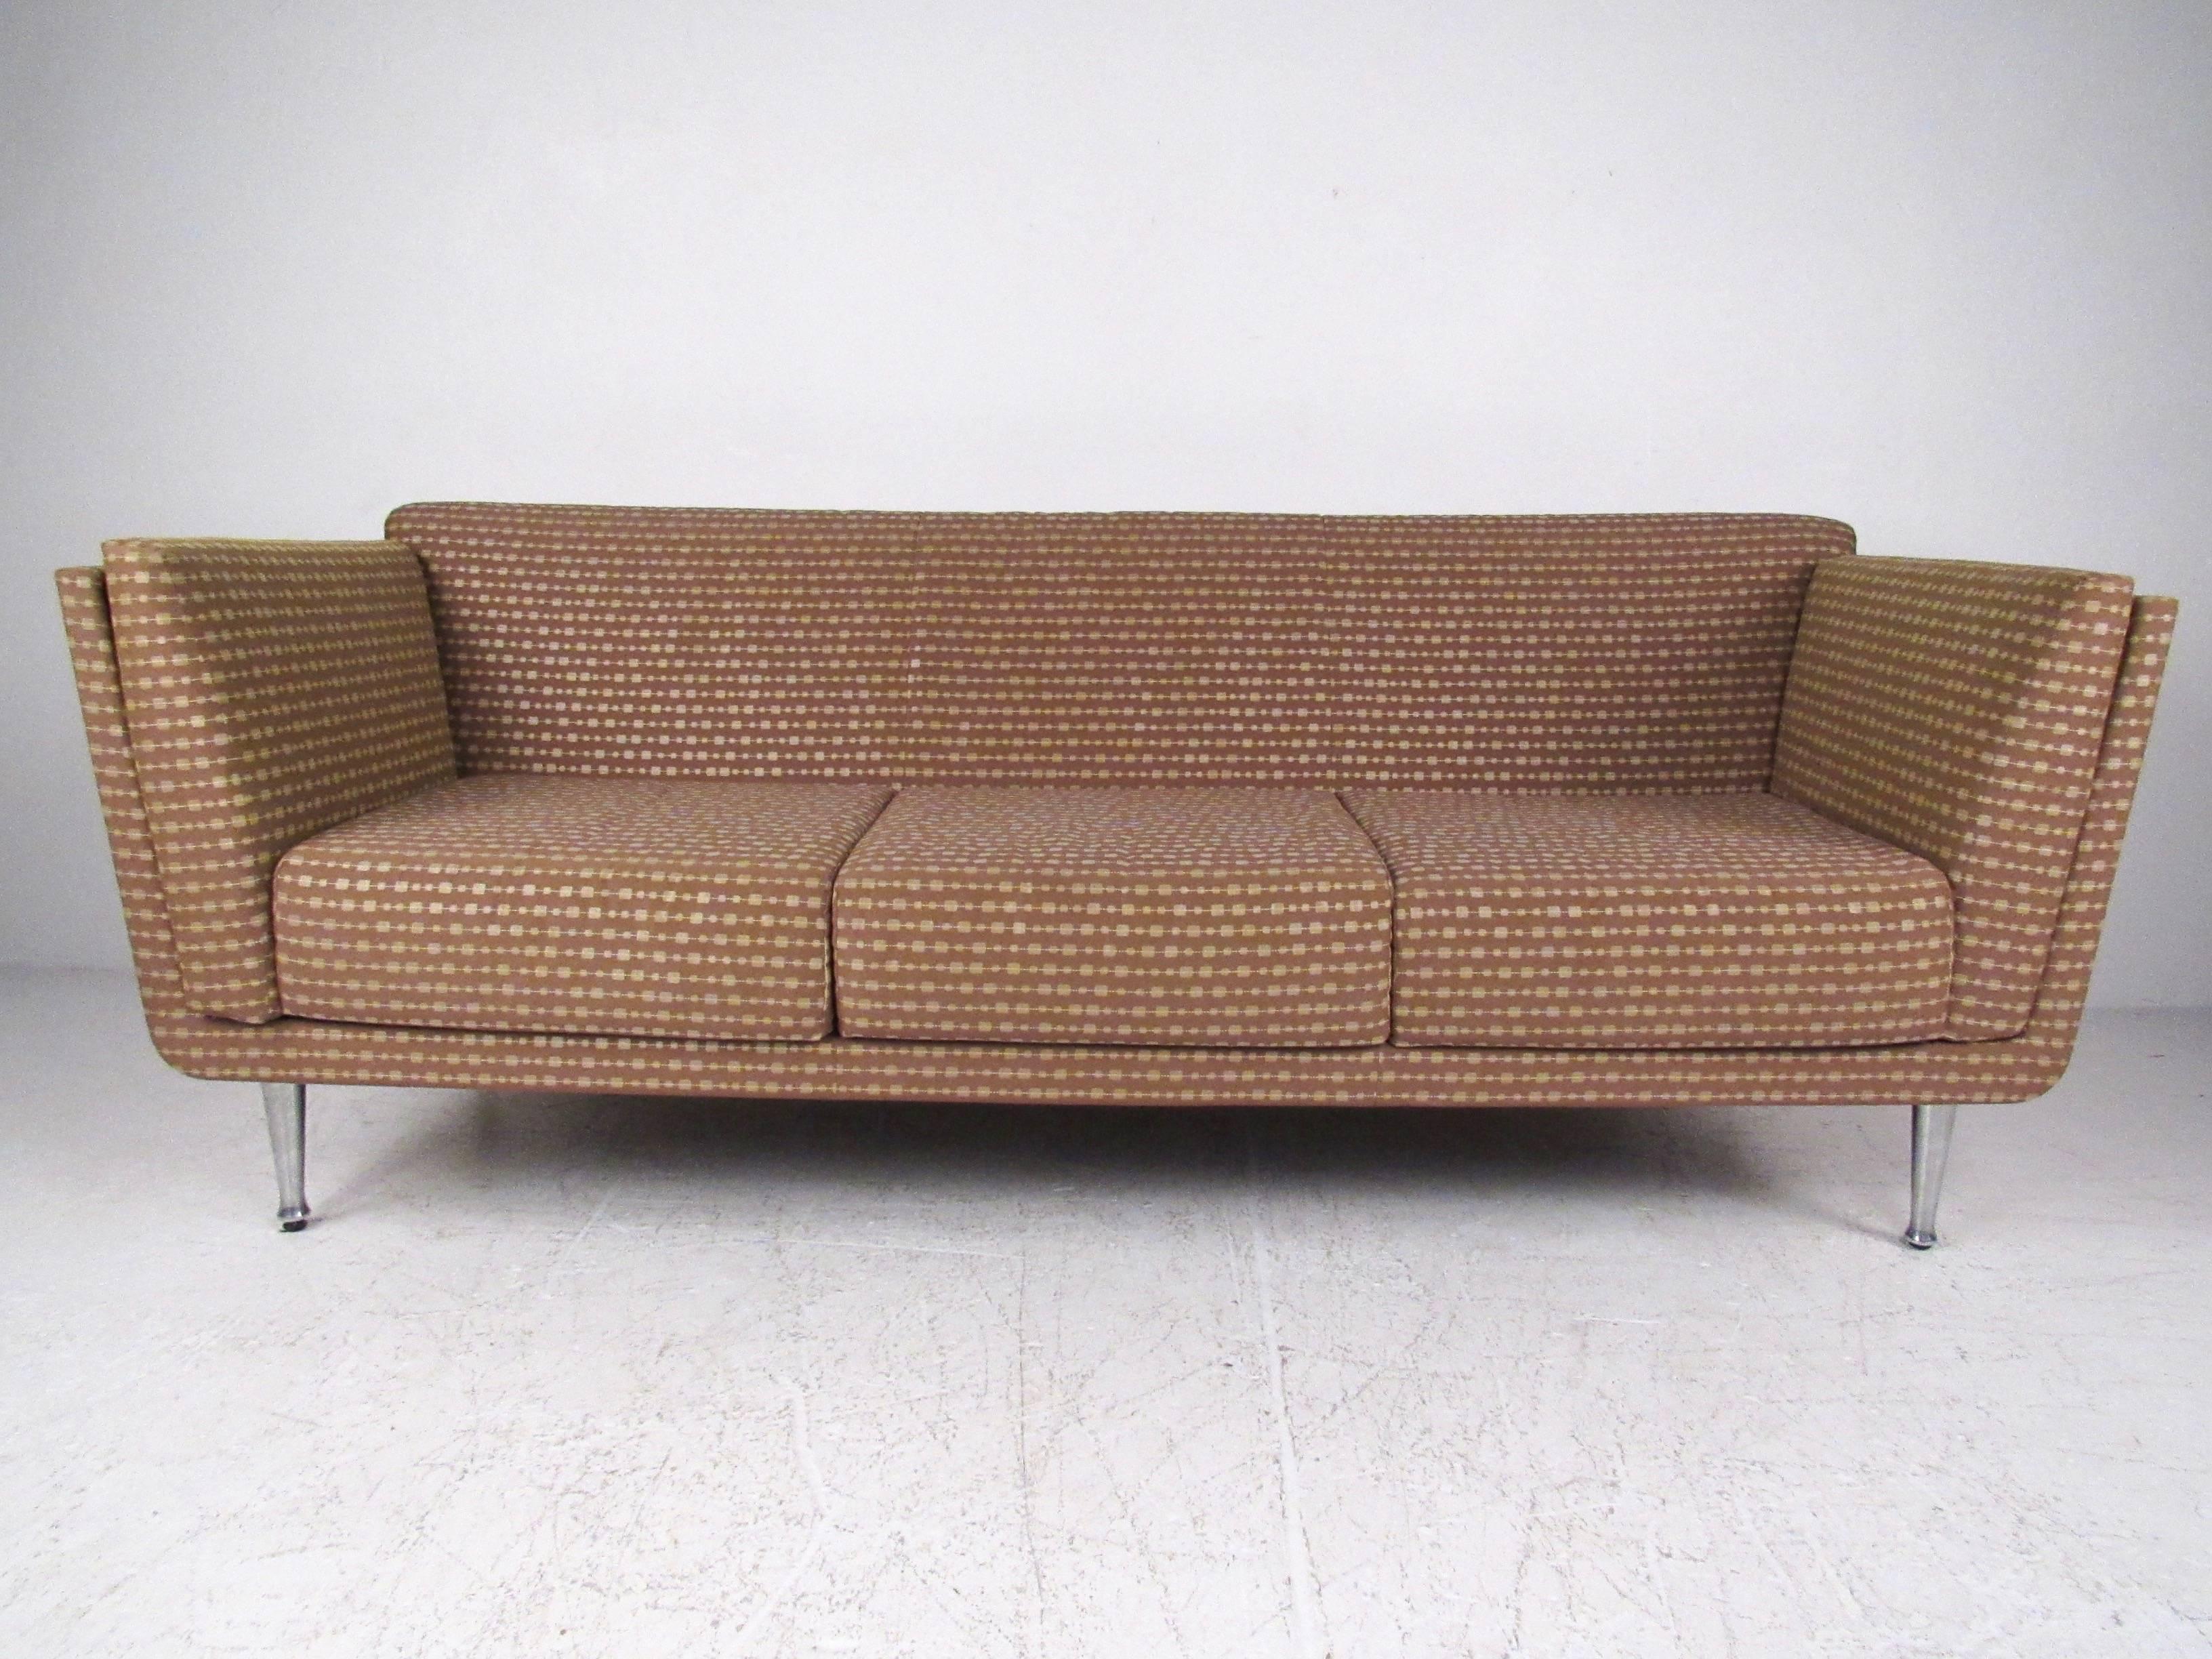 This stunning oak wrapped sofa features stylish upholstery, tapered aluminium legs, and oak wrapped frame. Designed by Mark Goetz for Herman Miller, this unique piece makes a stunning seating addition to any interior, whether it's home or business.